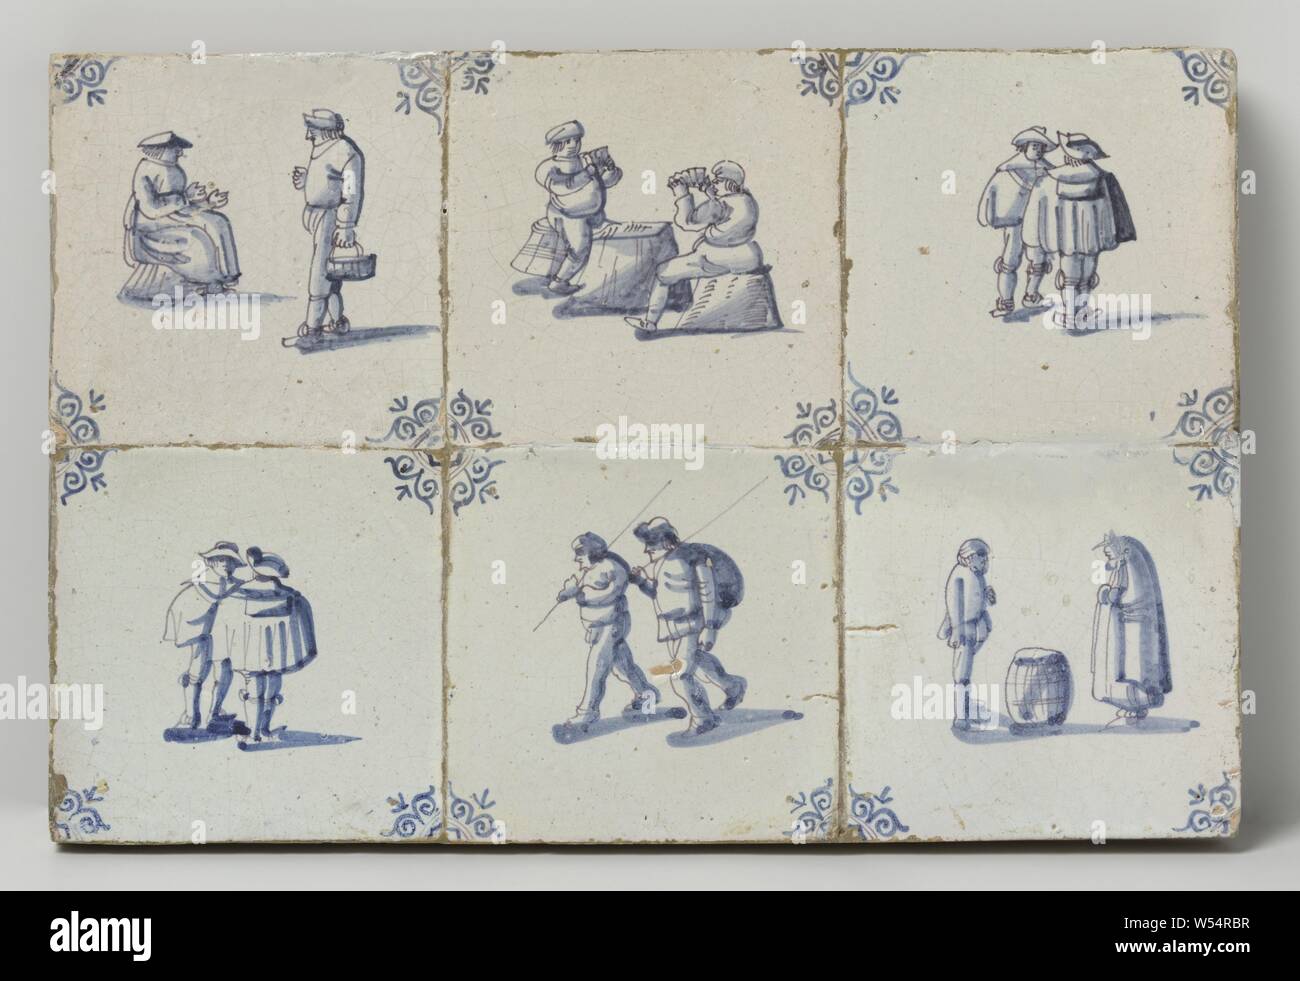 Field of six tiles with people and their activities, Field of six tiles (2 x 3) each with a blue and purple painted representation of two figures and their activities. In the corners, an oxhead., anonymous, Netherlands, c. 1625 - c. 1650, earthenware, tin glaze, h 25 cm × w 37.5 cm × d 2 cm Stock Photo